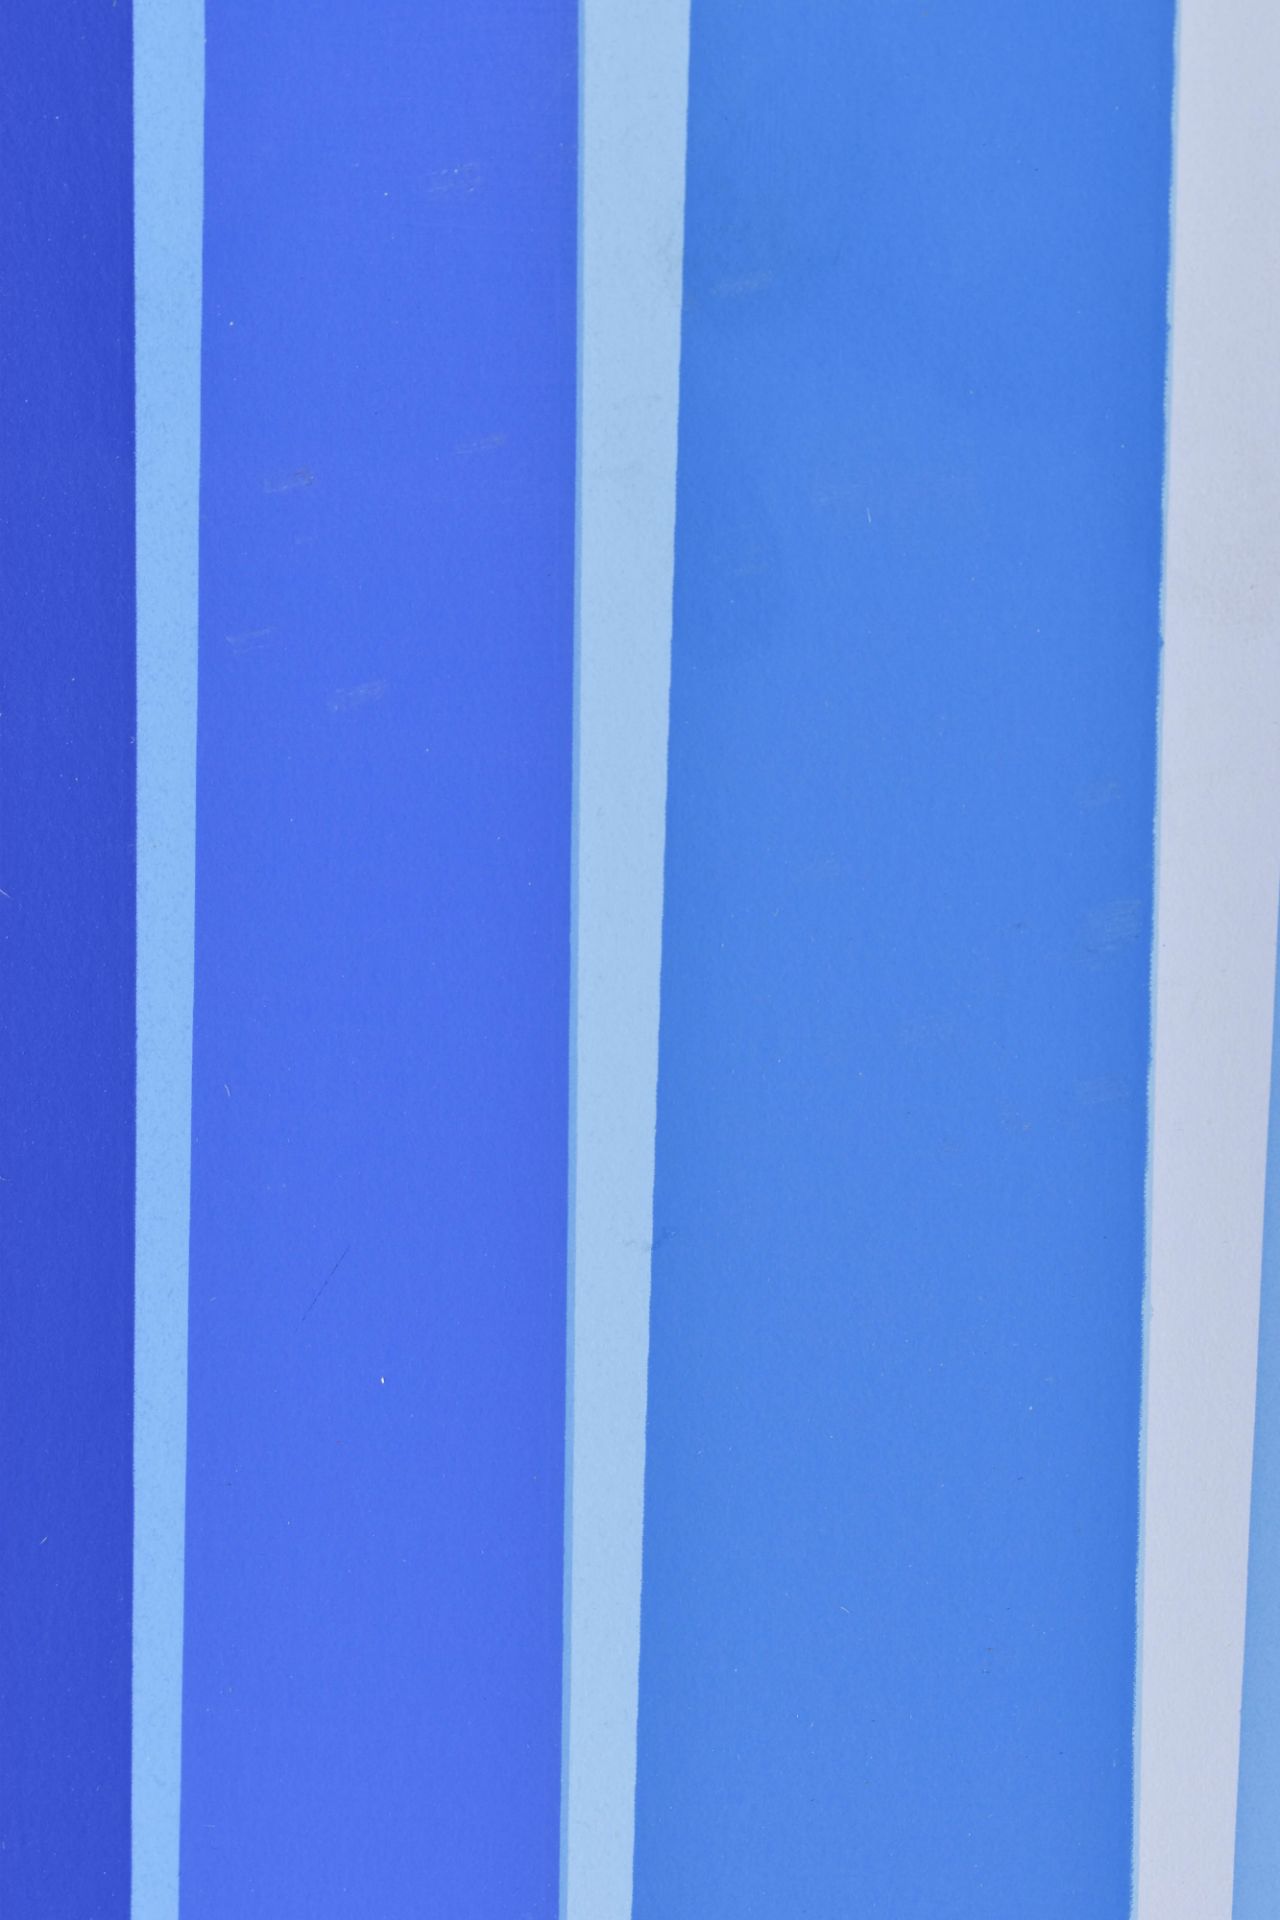 Lothar QUINTE (1923-2000)"Composition of stripes in blue"graphic - color screen print, signed and - Bild 2 aus 5